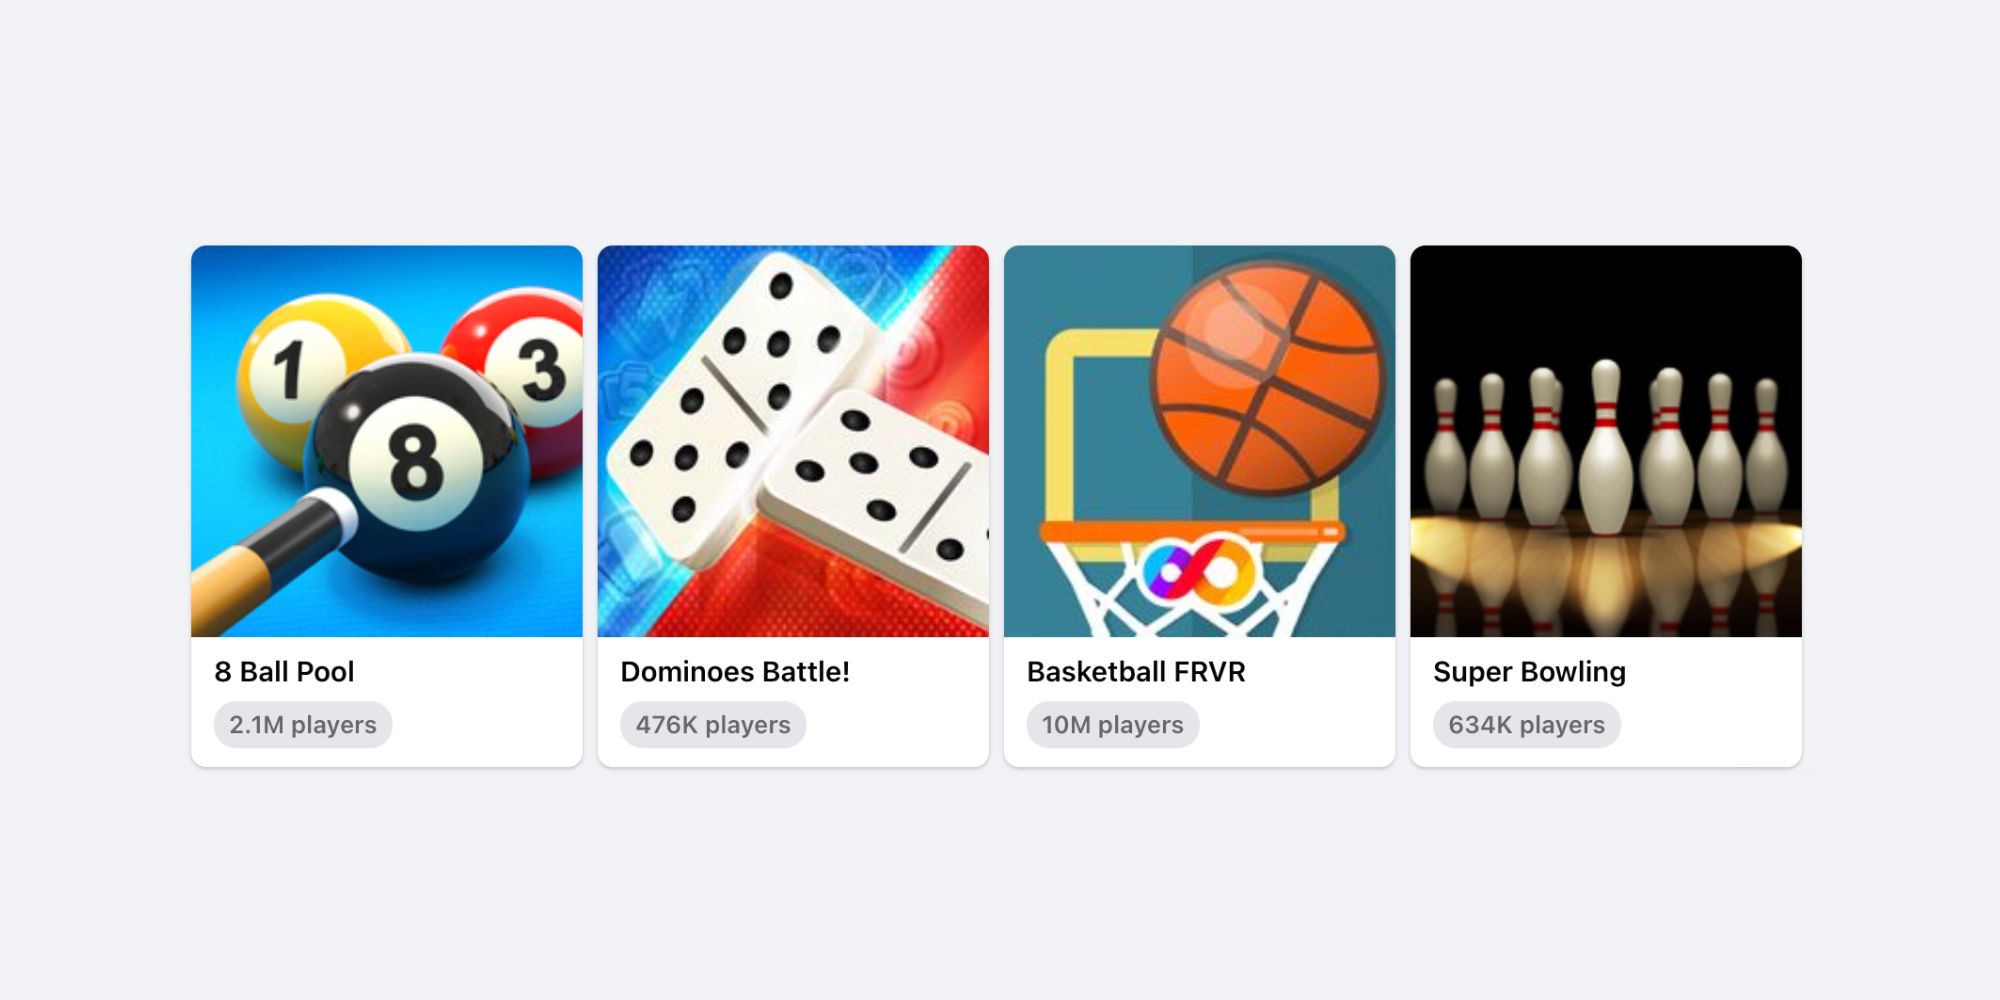 Icons for four games offered by Facebook are shown, including 8 ball, dominoes, basketball, and bowling